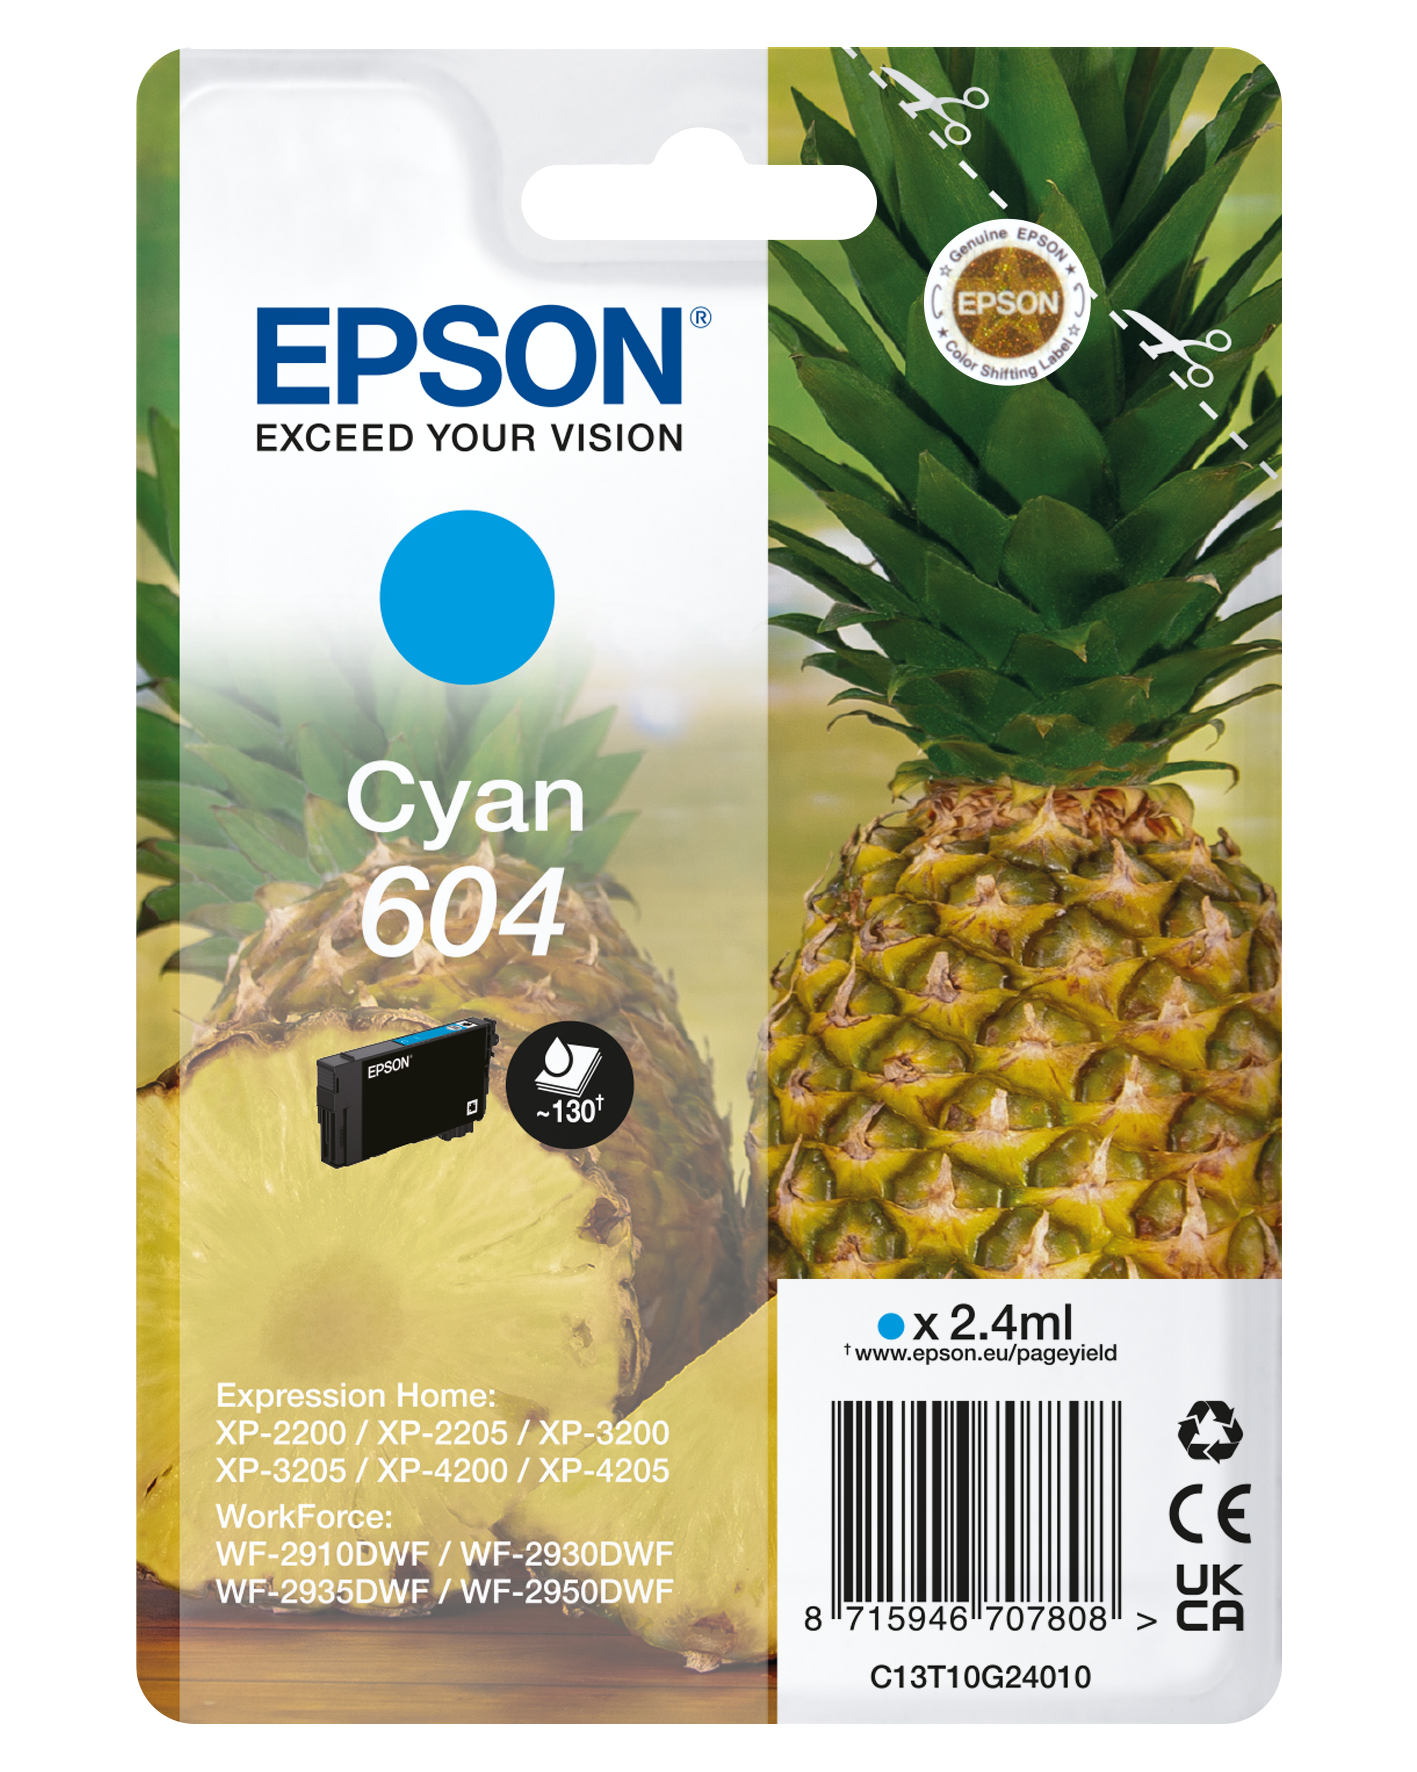 | Expression | Printers XP-3205 Epson Consumer | Europe | Home Products | Inkjet Printers